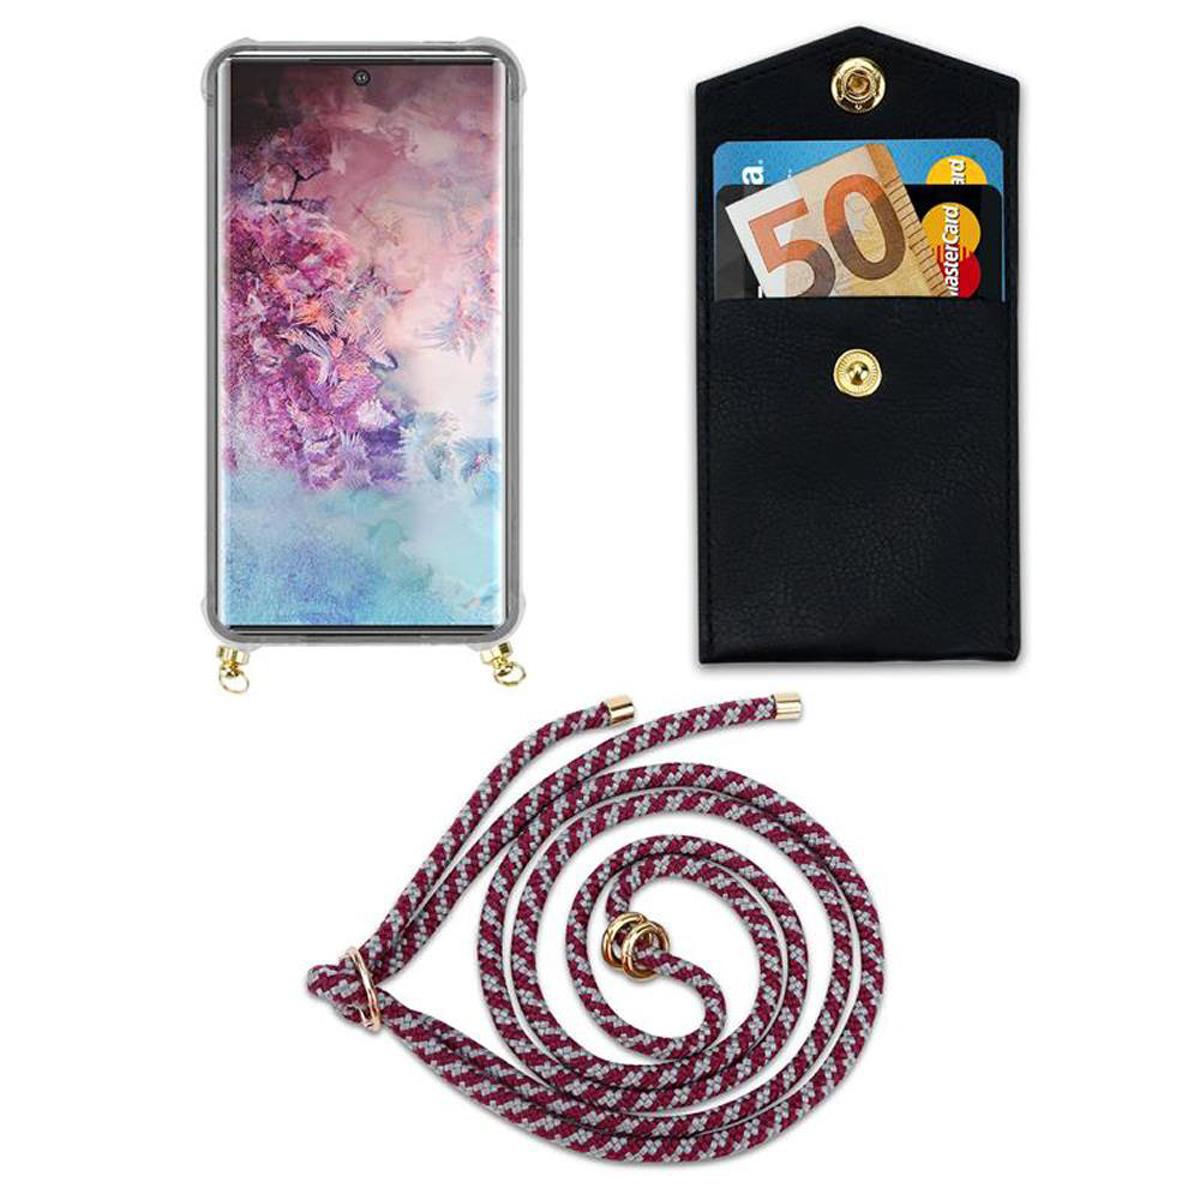 Backcover, Ringen, WEIß Kette mit Hülle, und CADORABO ROT Band Samsung, Gold Kordel abnehmbarer 10 Galaxy PLUS, NOTE Handy